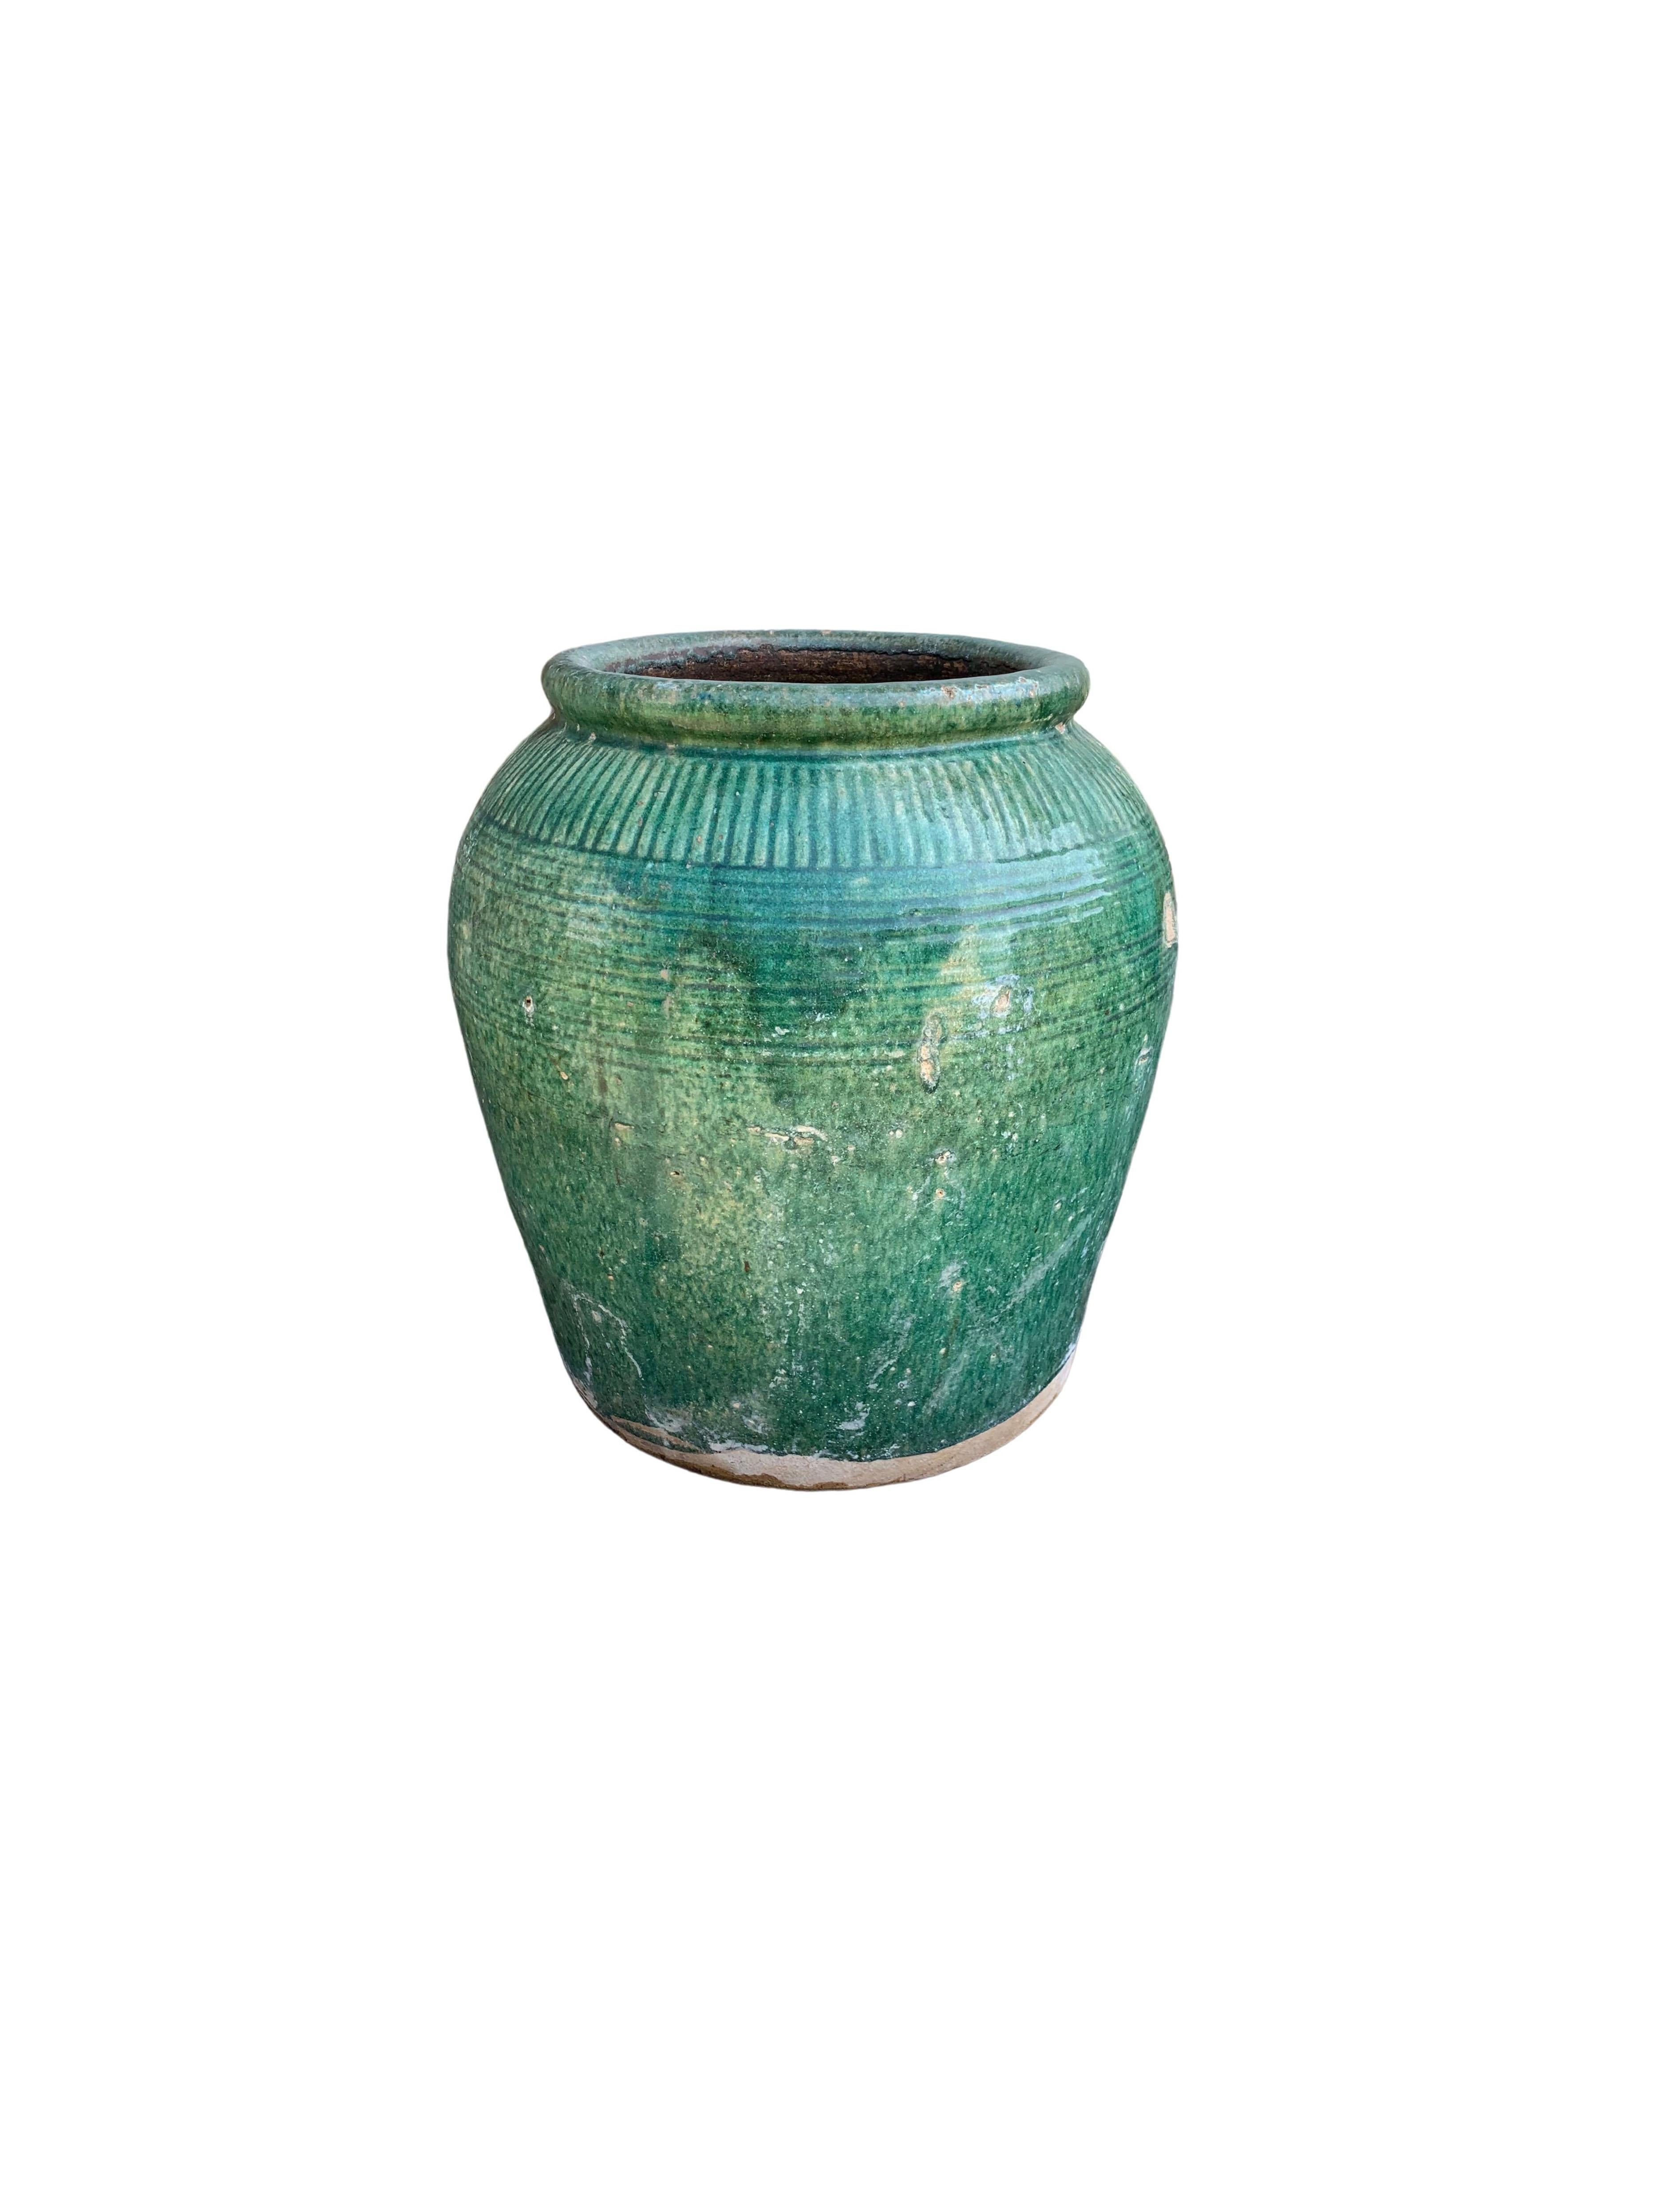 Antique Chinese Green Glazed Ceramic Soy Sauce Jar, c. 1900 For Sale 1